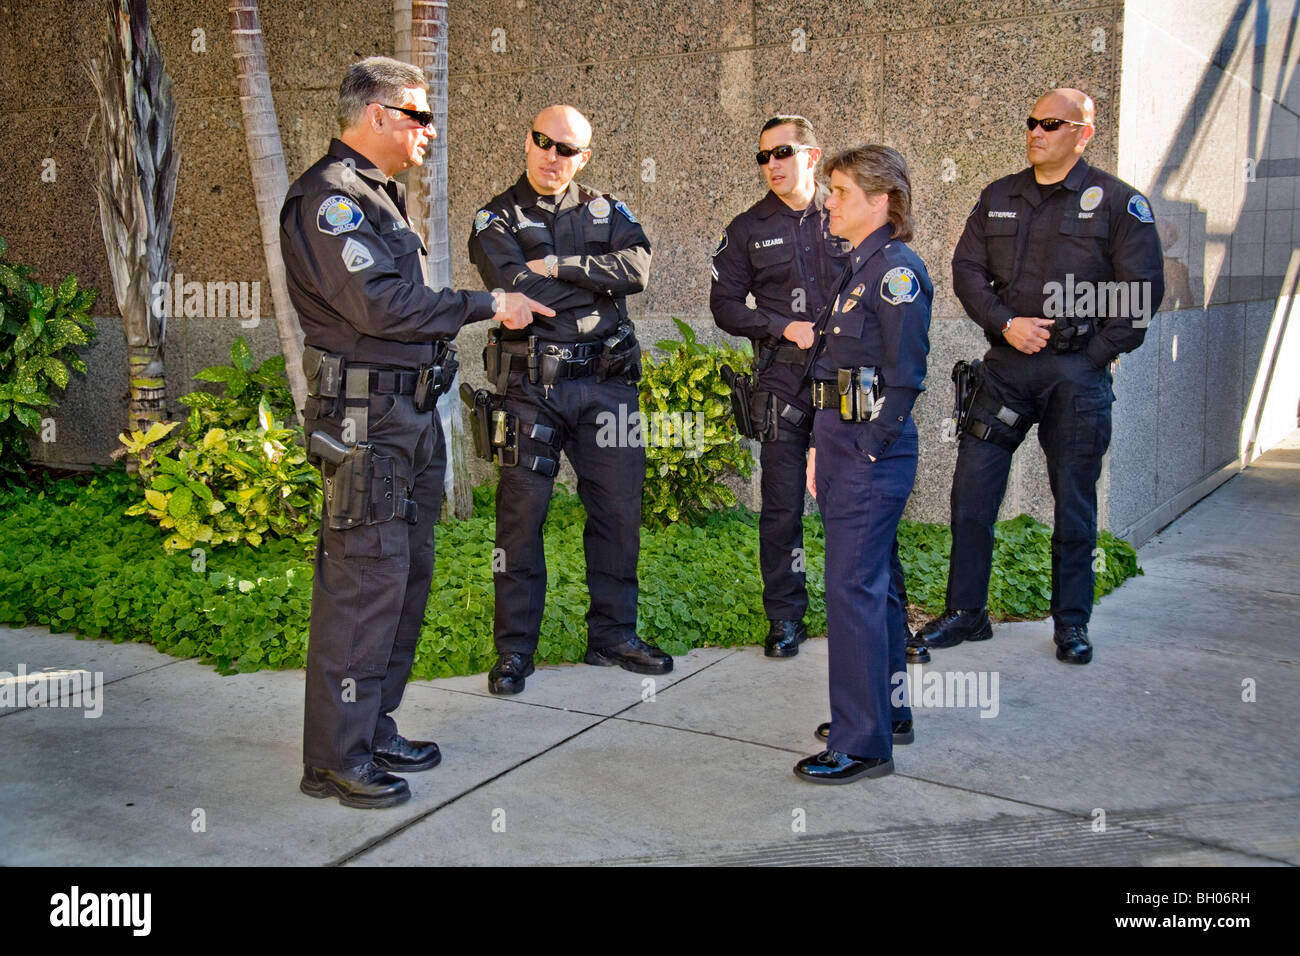 A female police commander speaks with members of her department's SWAT (Special Weapons And Tactics) team. Stock Photo